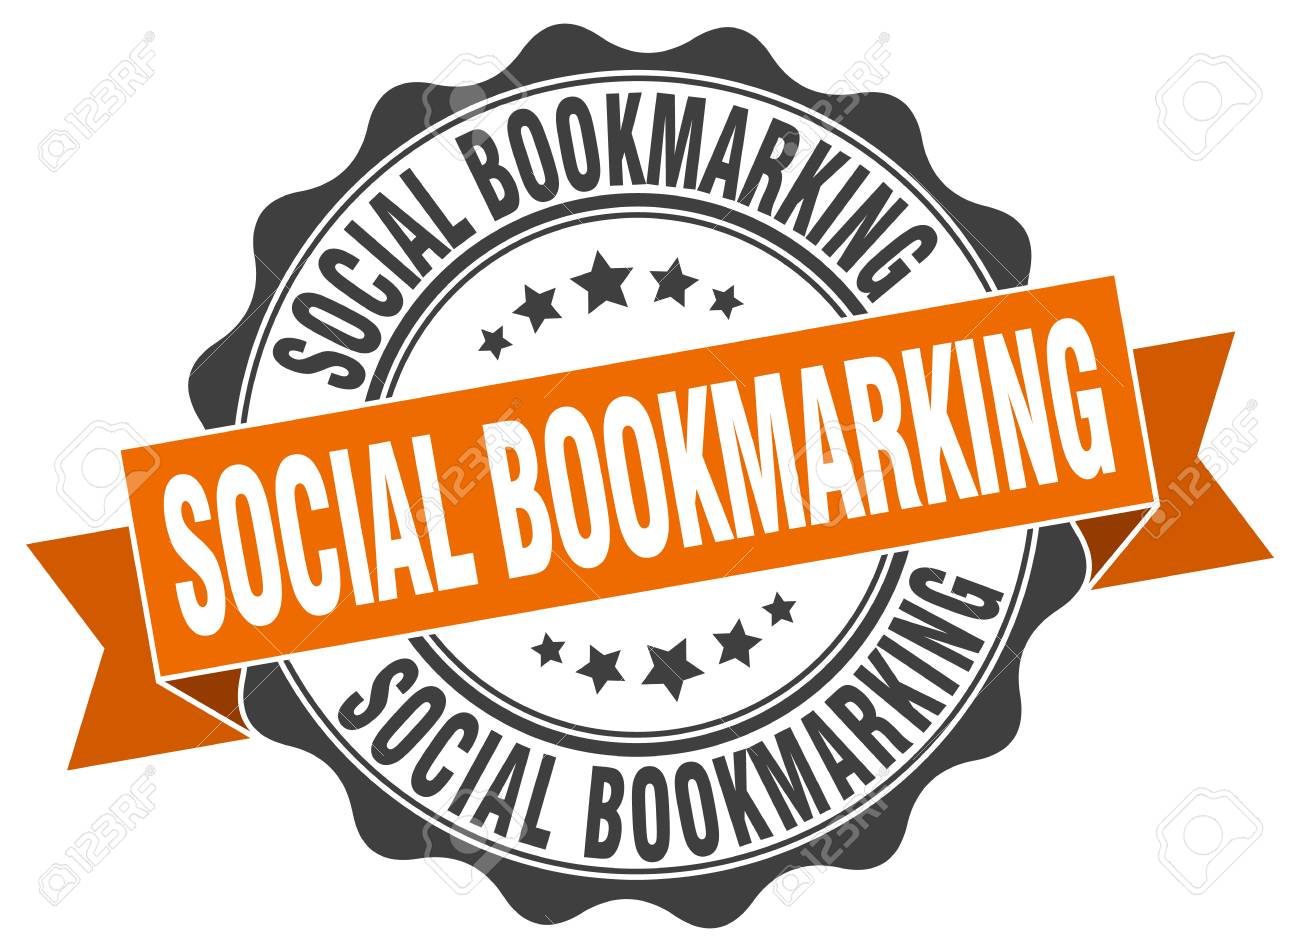 Social Bookmarking For SEO